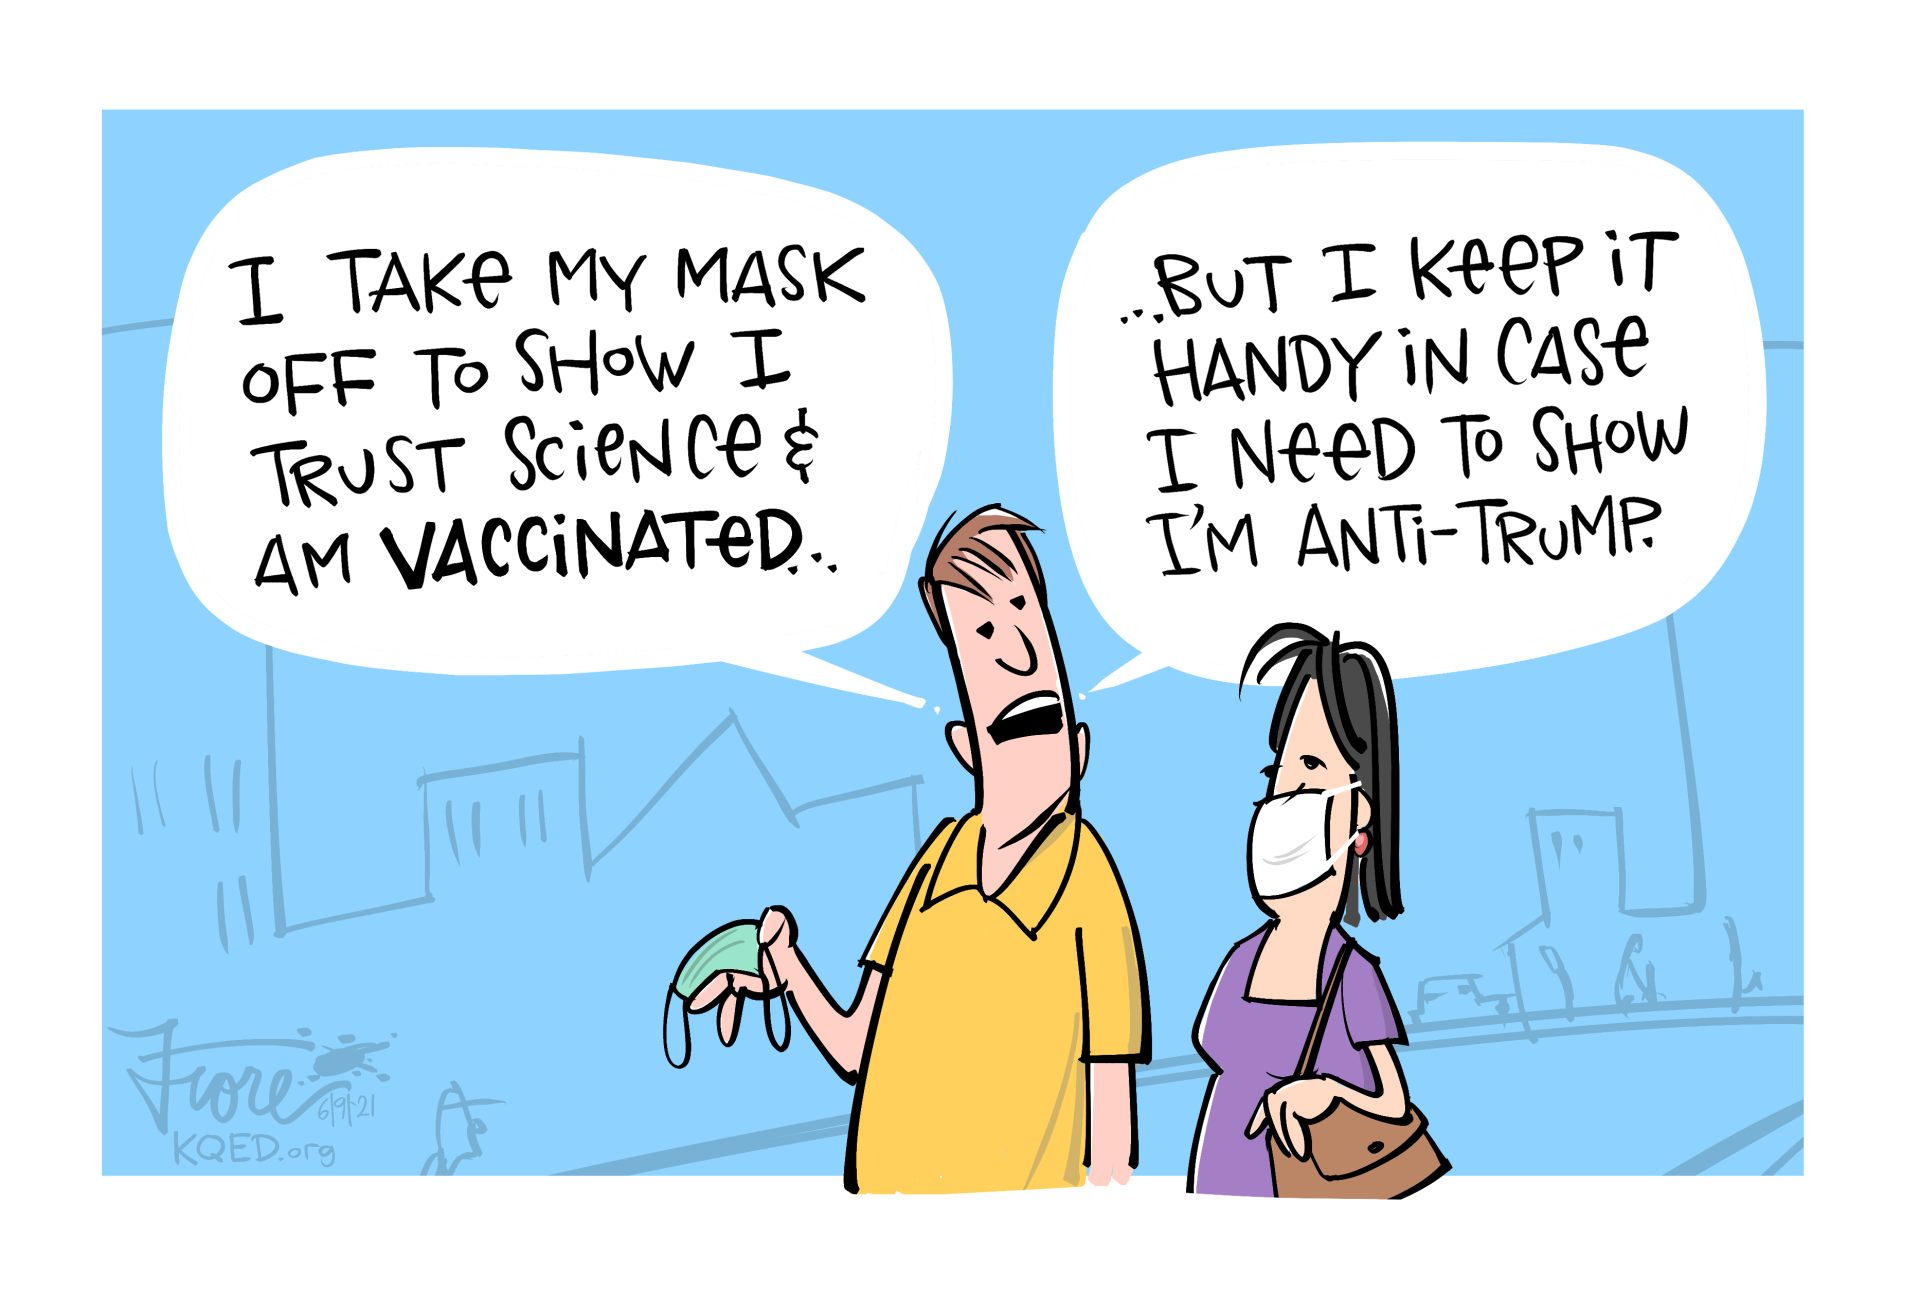 A Mark Fiore cartoon about wearing face masks, with the main character who is holding a face mask saying, "I take my mask off to show I trust science and am vaccinated... but I keep it handy in case I need to show I'm anti-Trump."